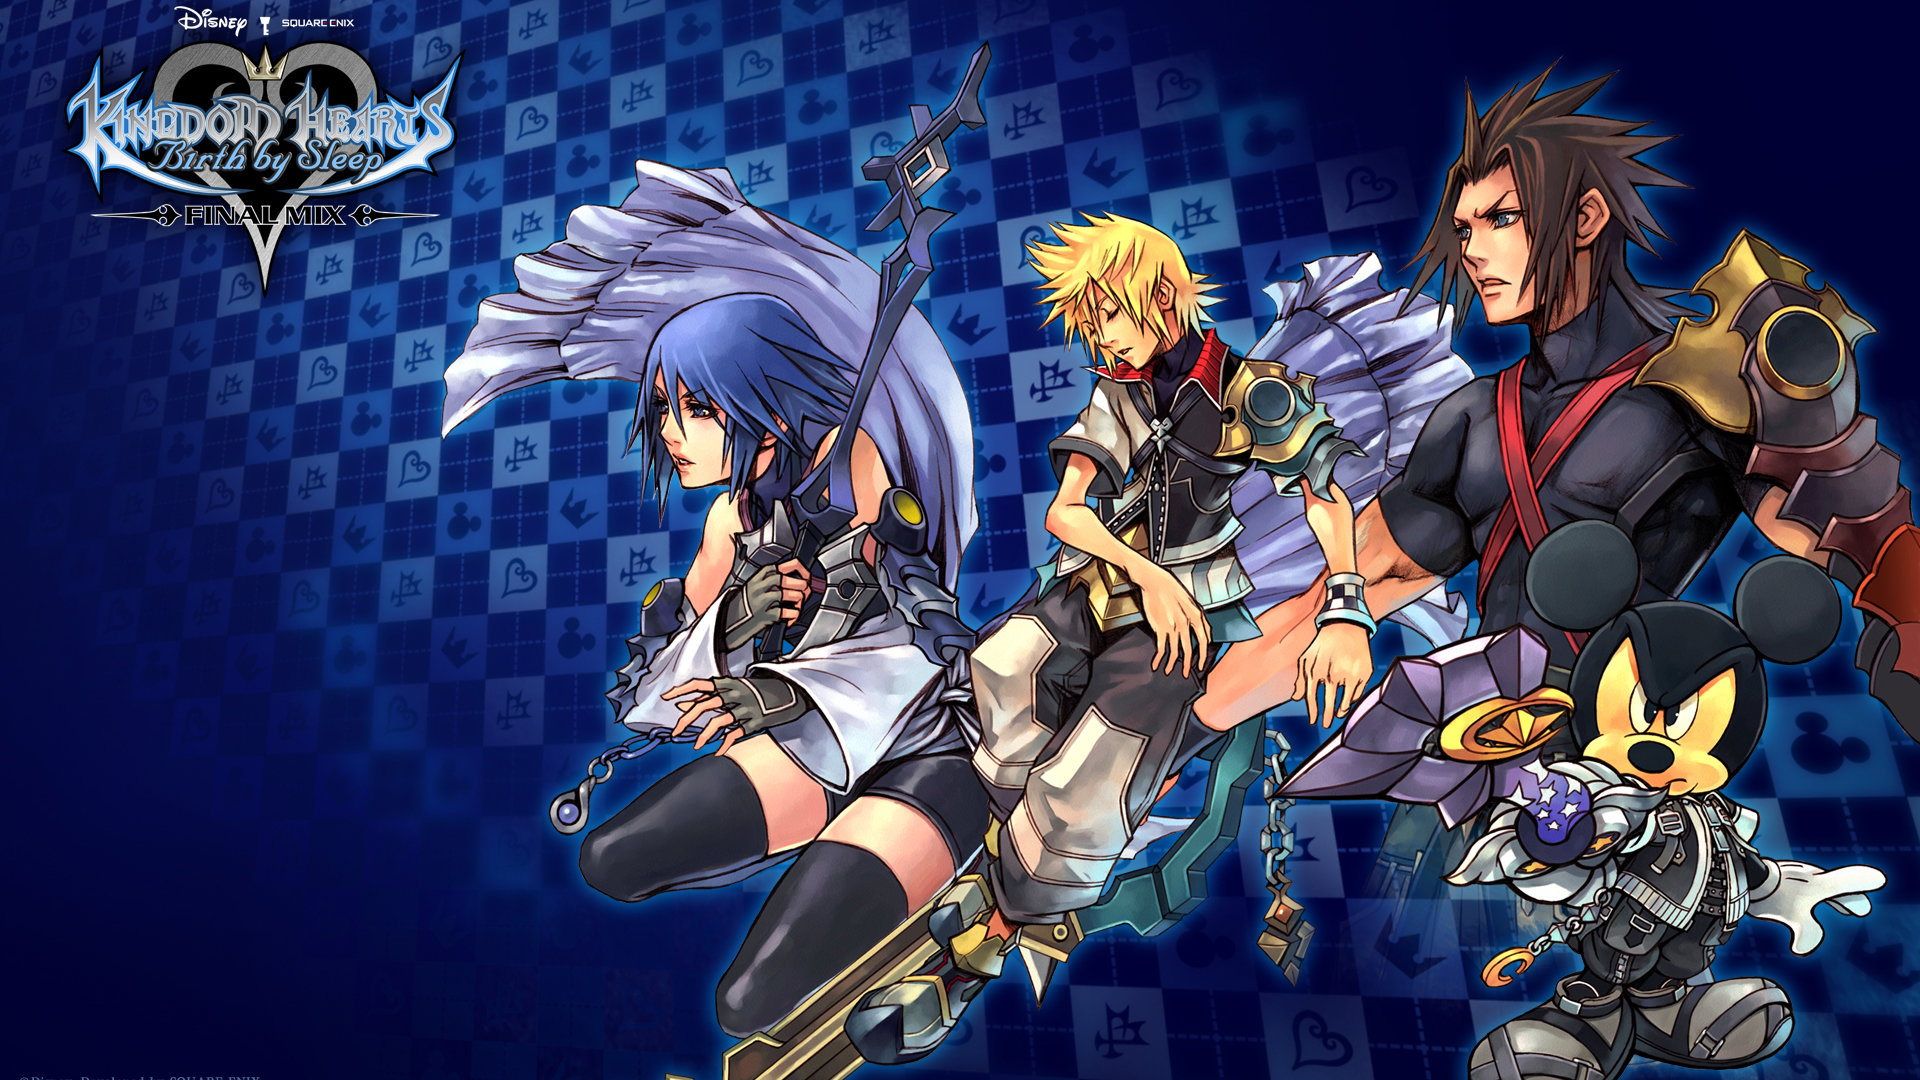 Download hd 1920x1080 Kingdom Hearts PC background ID:110053 for free